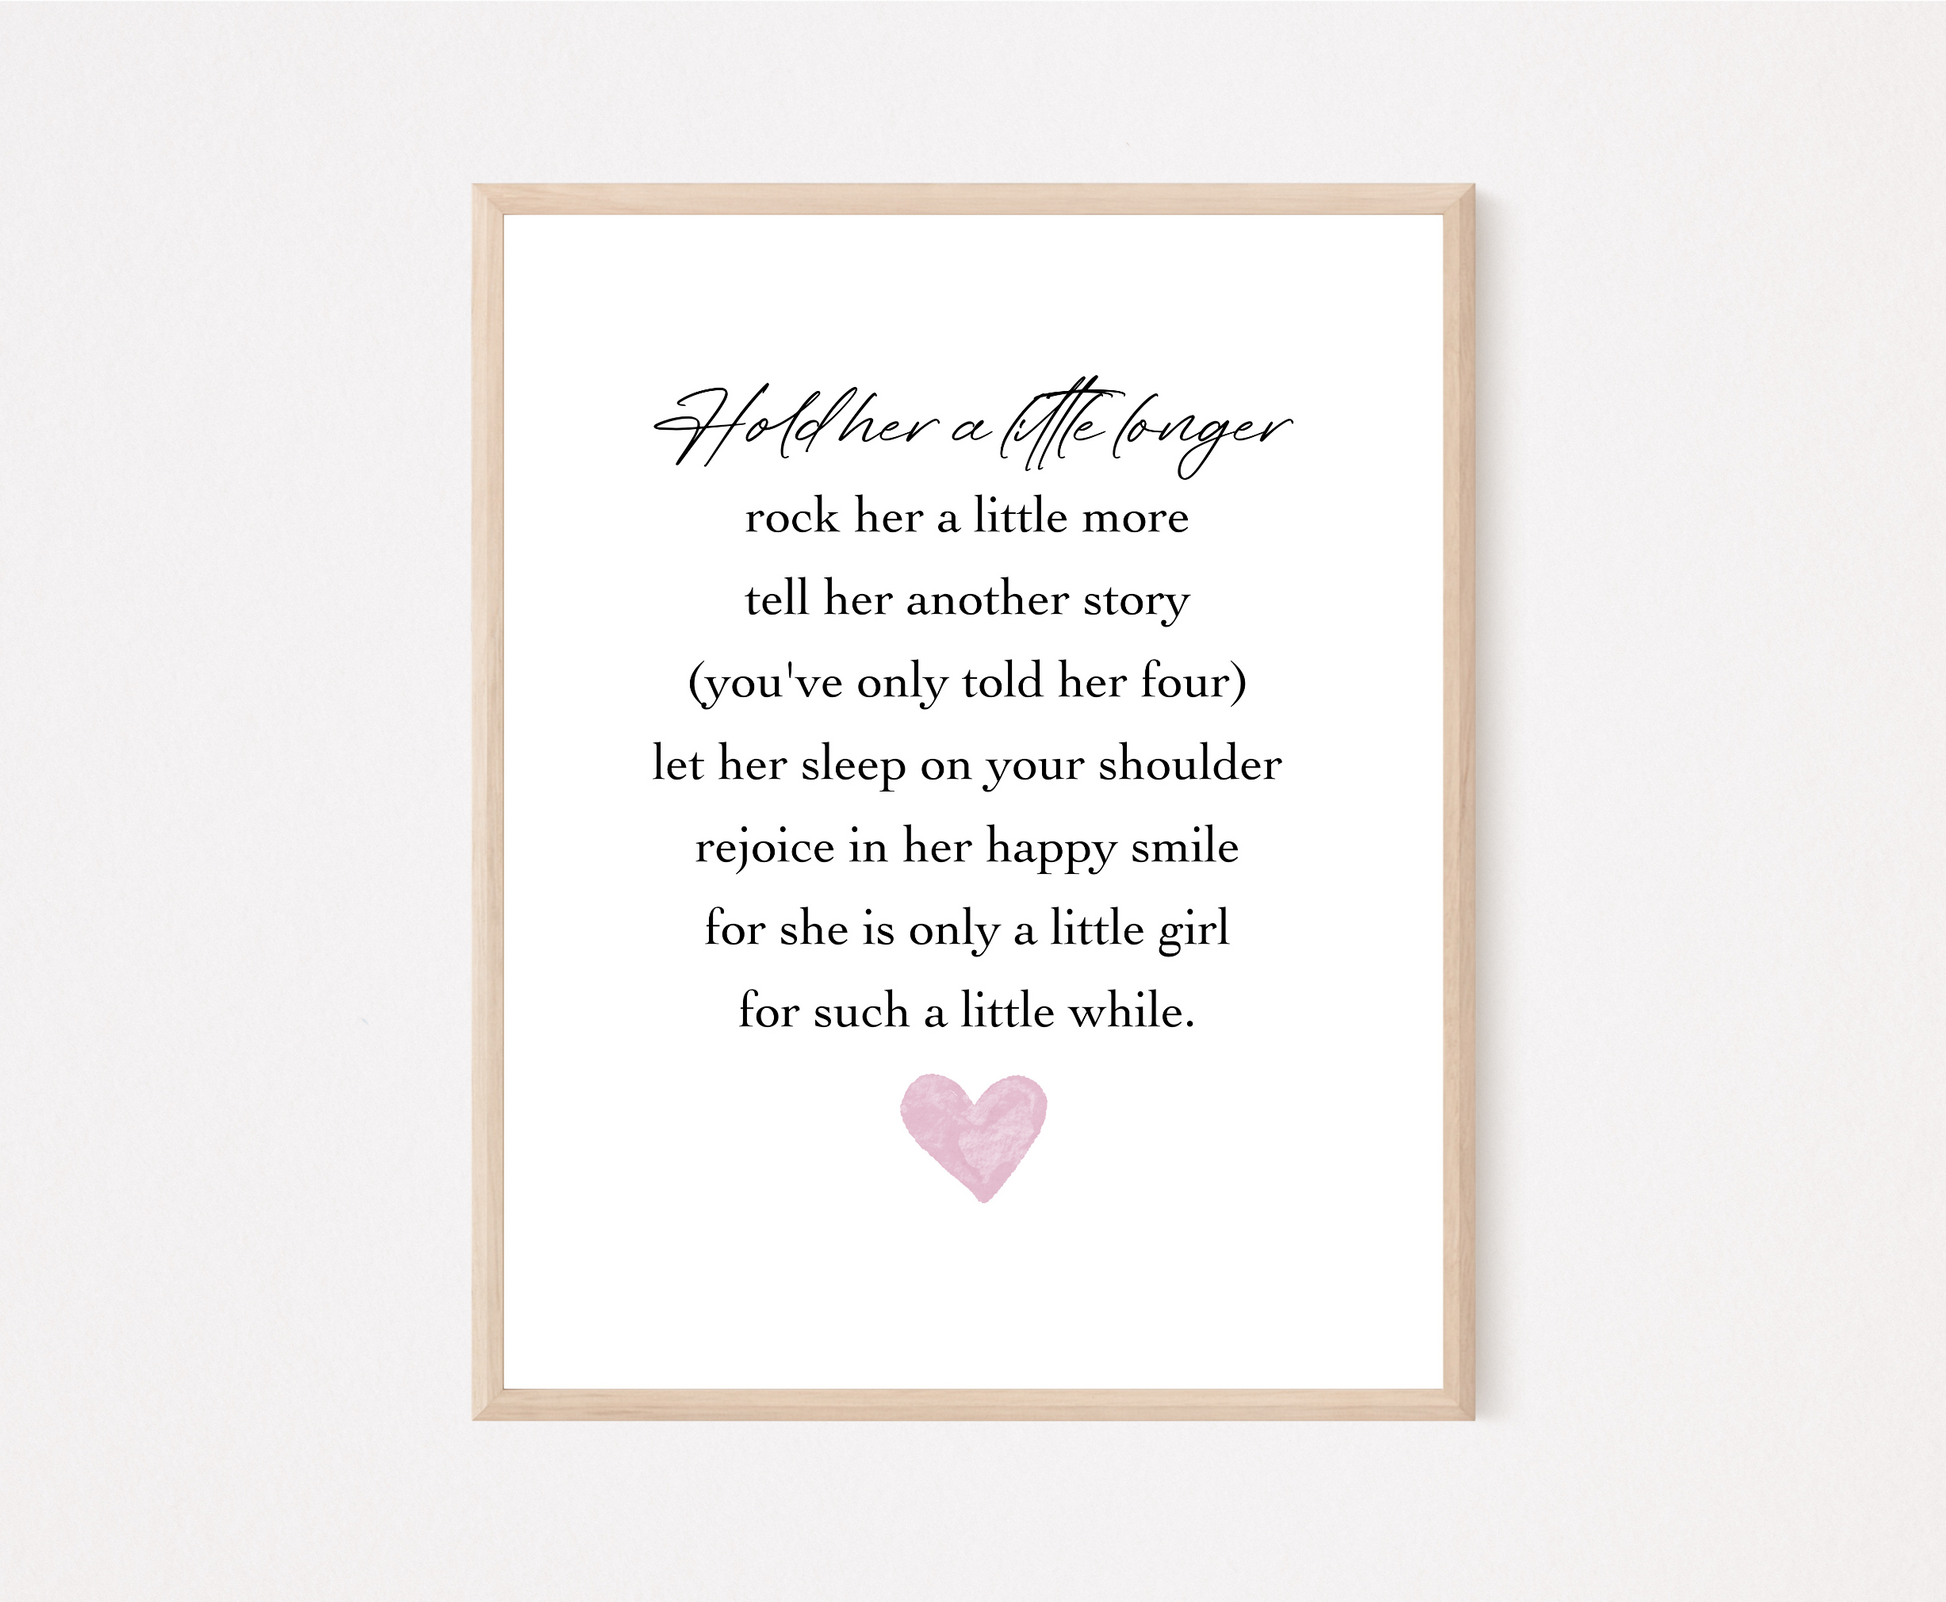 A digital print that has a pink heart at the bottom, and a piece of writing that says: Hold her a little longer, rock her a little more, tell her another story, (you have only told her four), let her sleep on your shoulder, rejoice in her happy smile, for she is only a little girl, for such a little while.